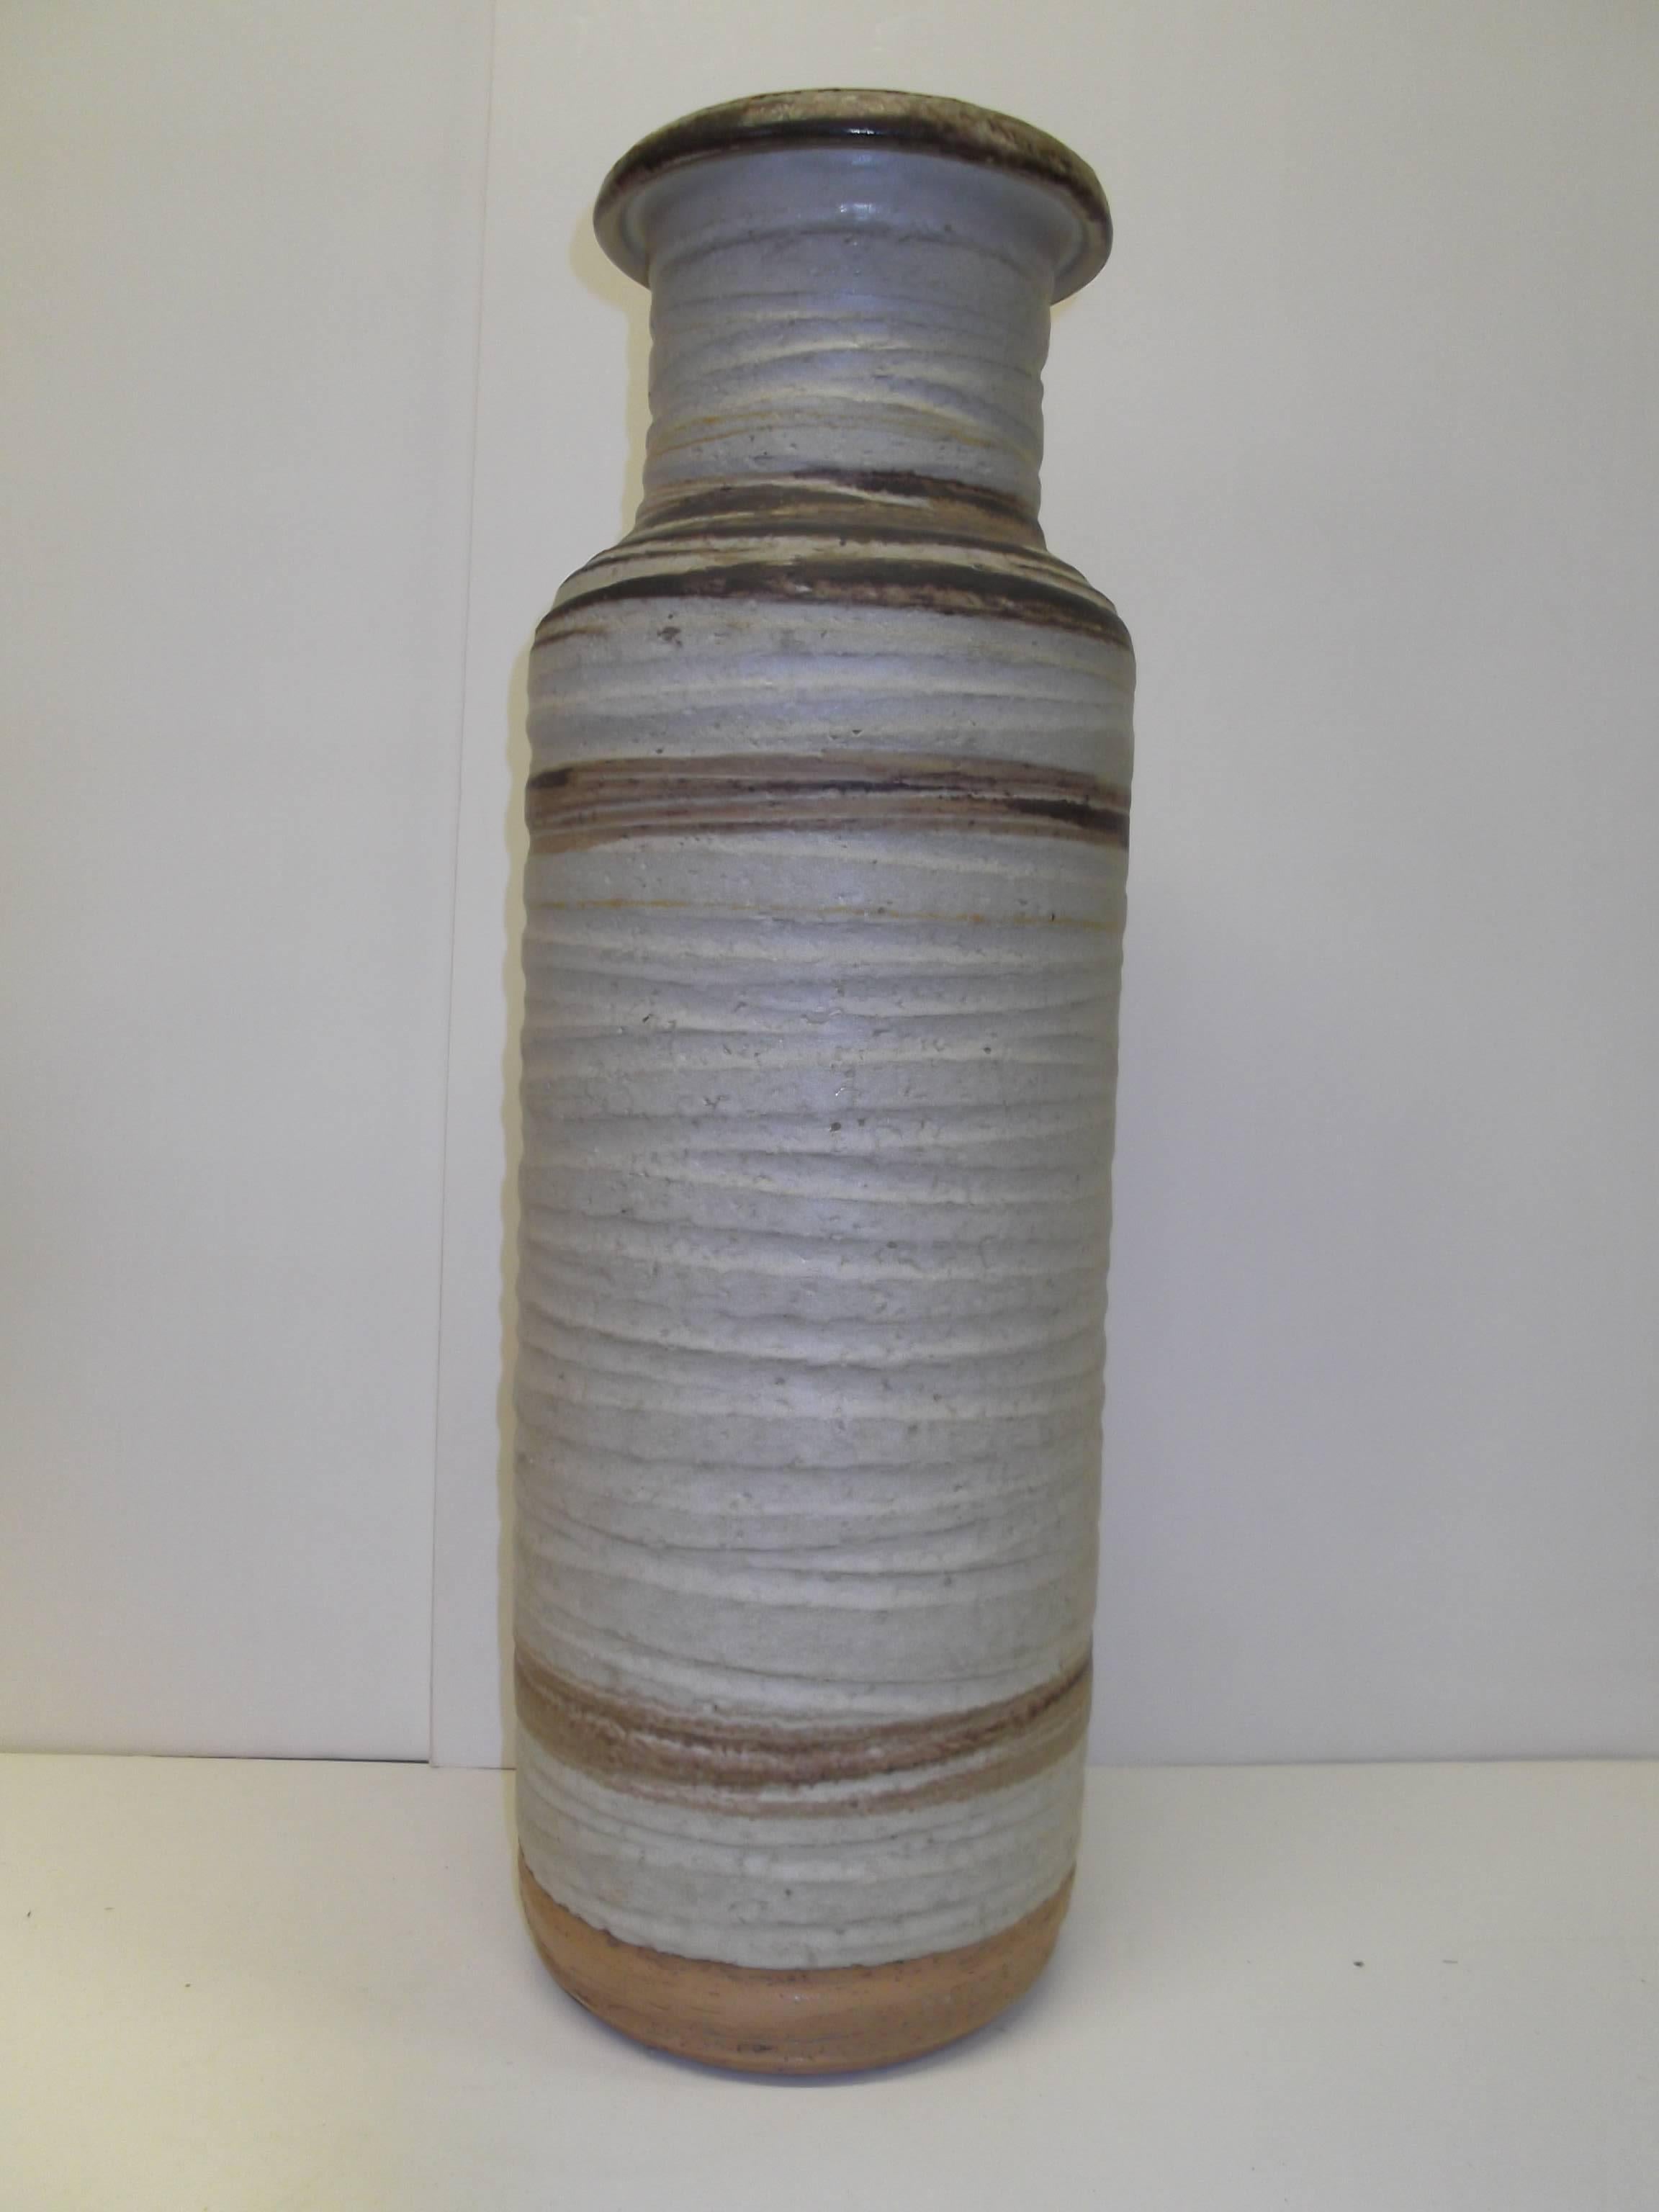 This is a nice large size, signed with Rosenthal Netter label, Bitossi Italian pottery vase. It is in natural tones of greys and browns, on natural color clay. There are two small yellow rings as well. It stands a tall 18